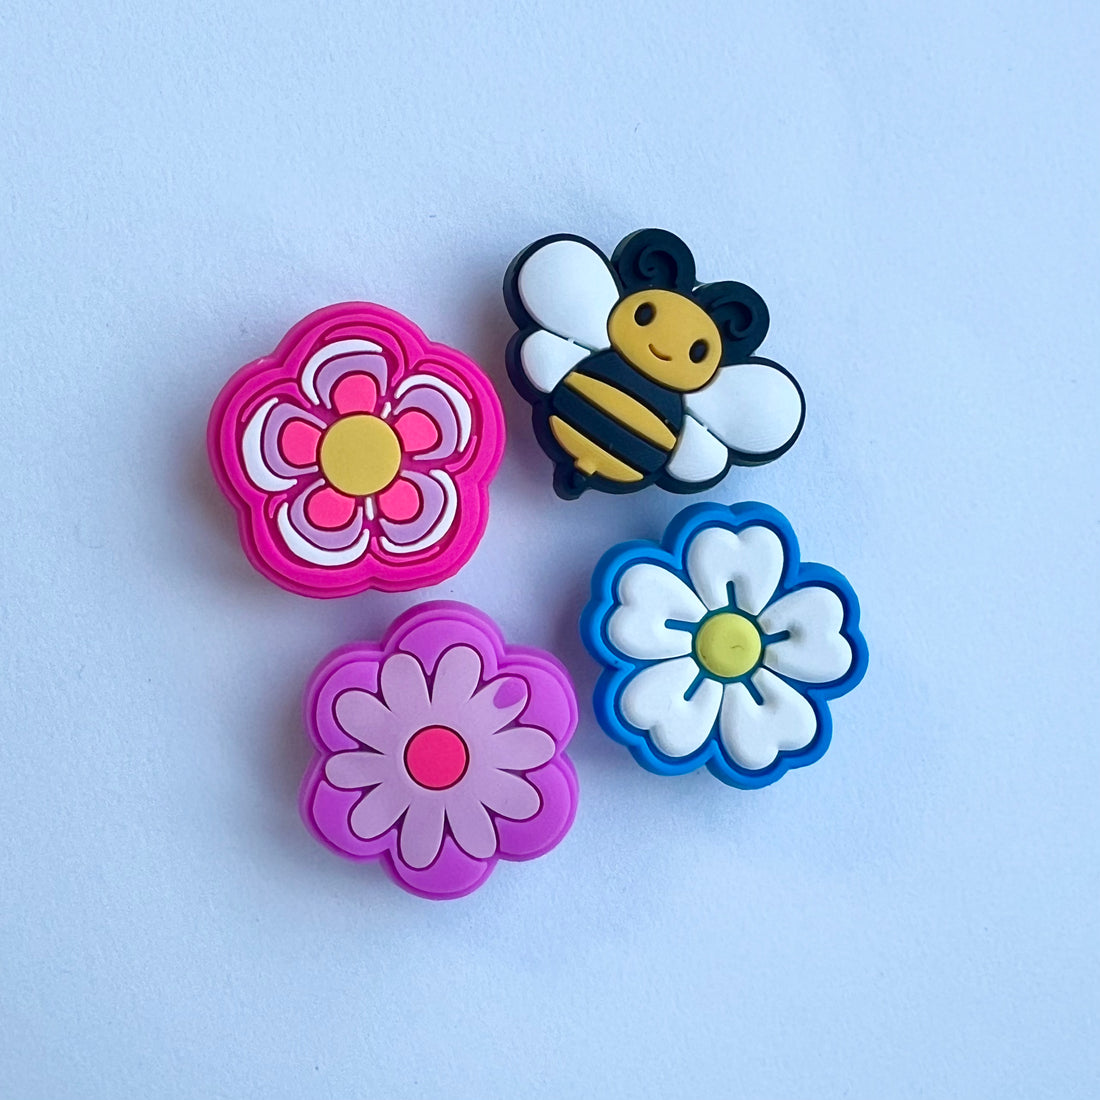 The Bumblebee Charms Pack